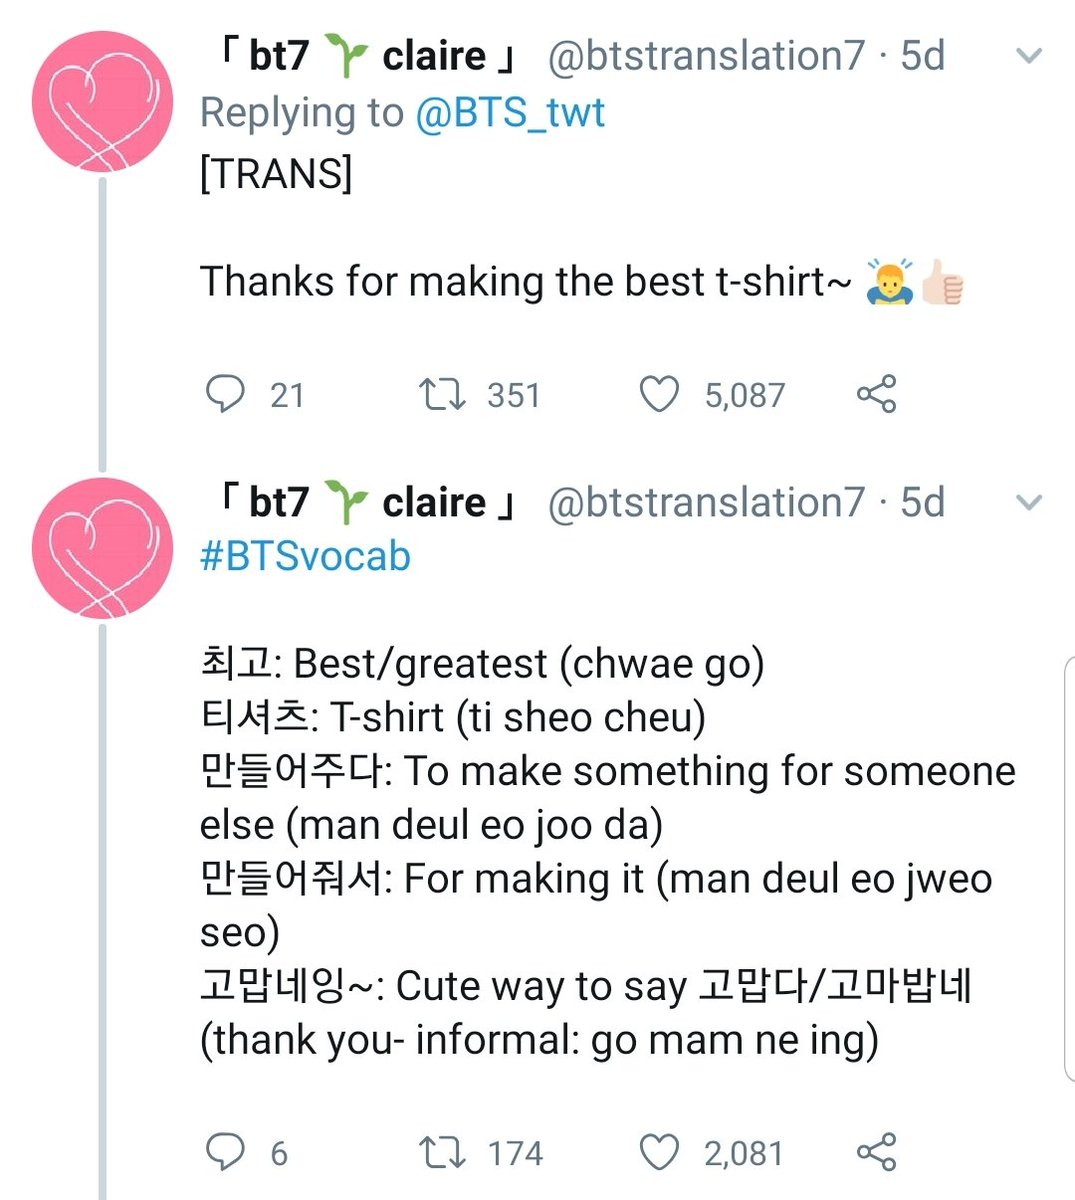 There are ARMY translators who not only translate BTS content from Korean to other languages, but they also teach people Korean as well. Some amazing ones are  @doolsetbangtan,  @btstranslation7,  @BTS_Trans,  @JL_Kdiamond and so on.